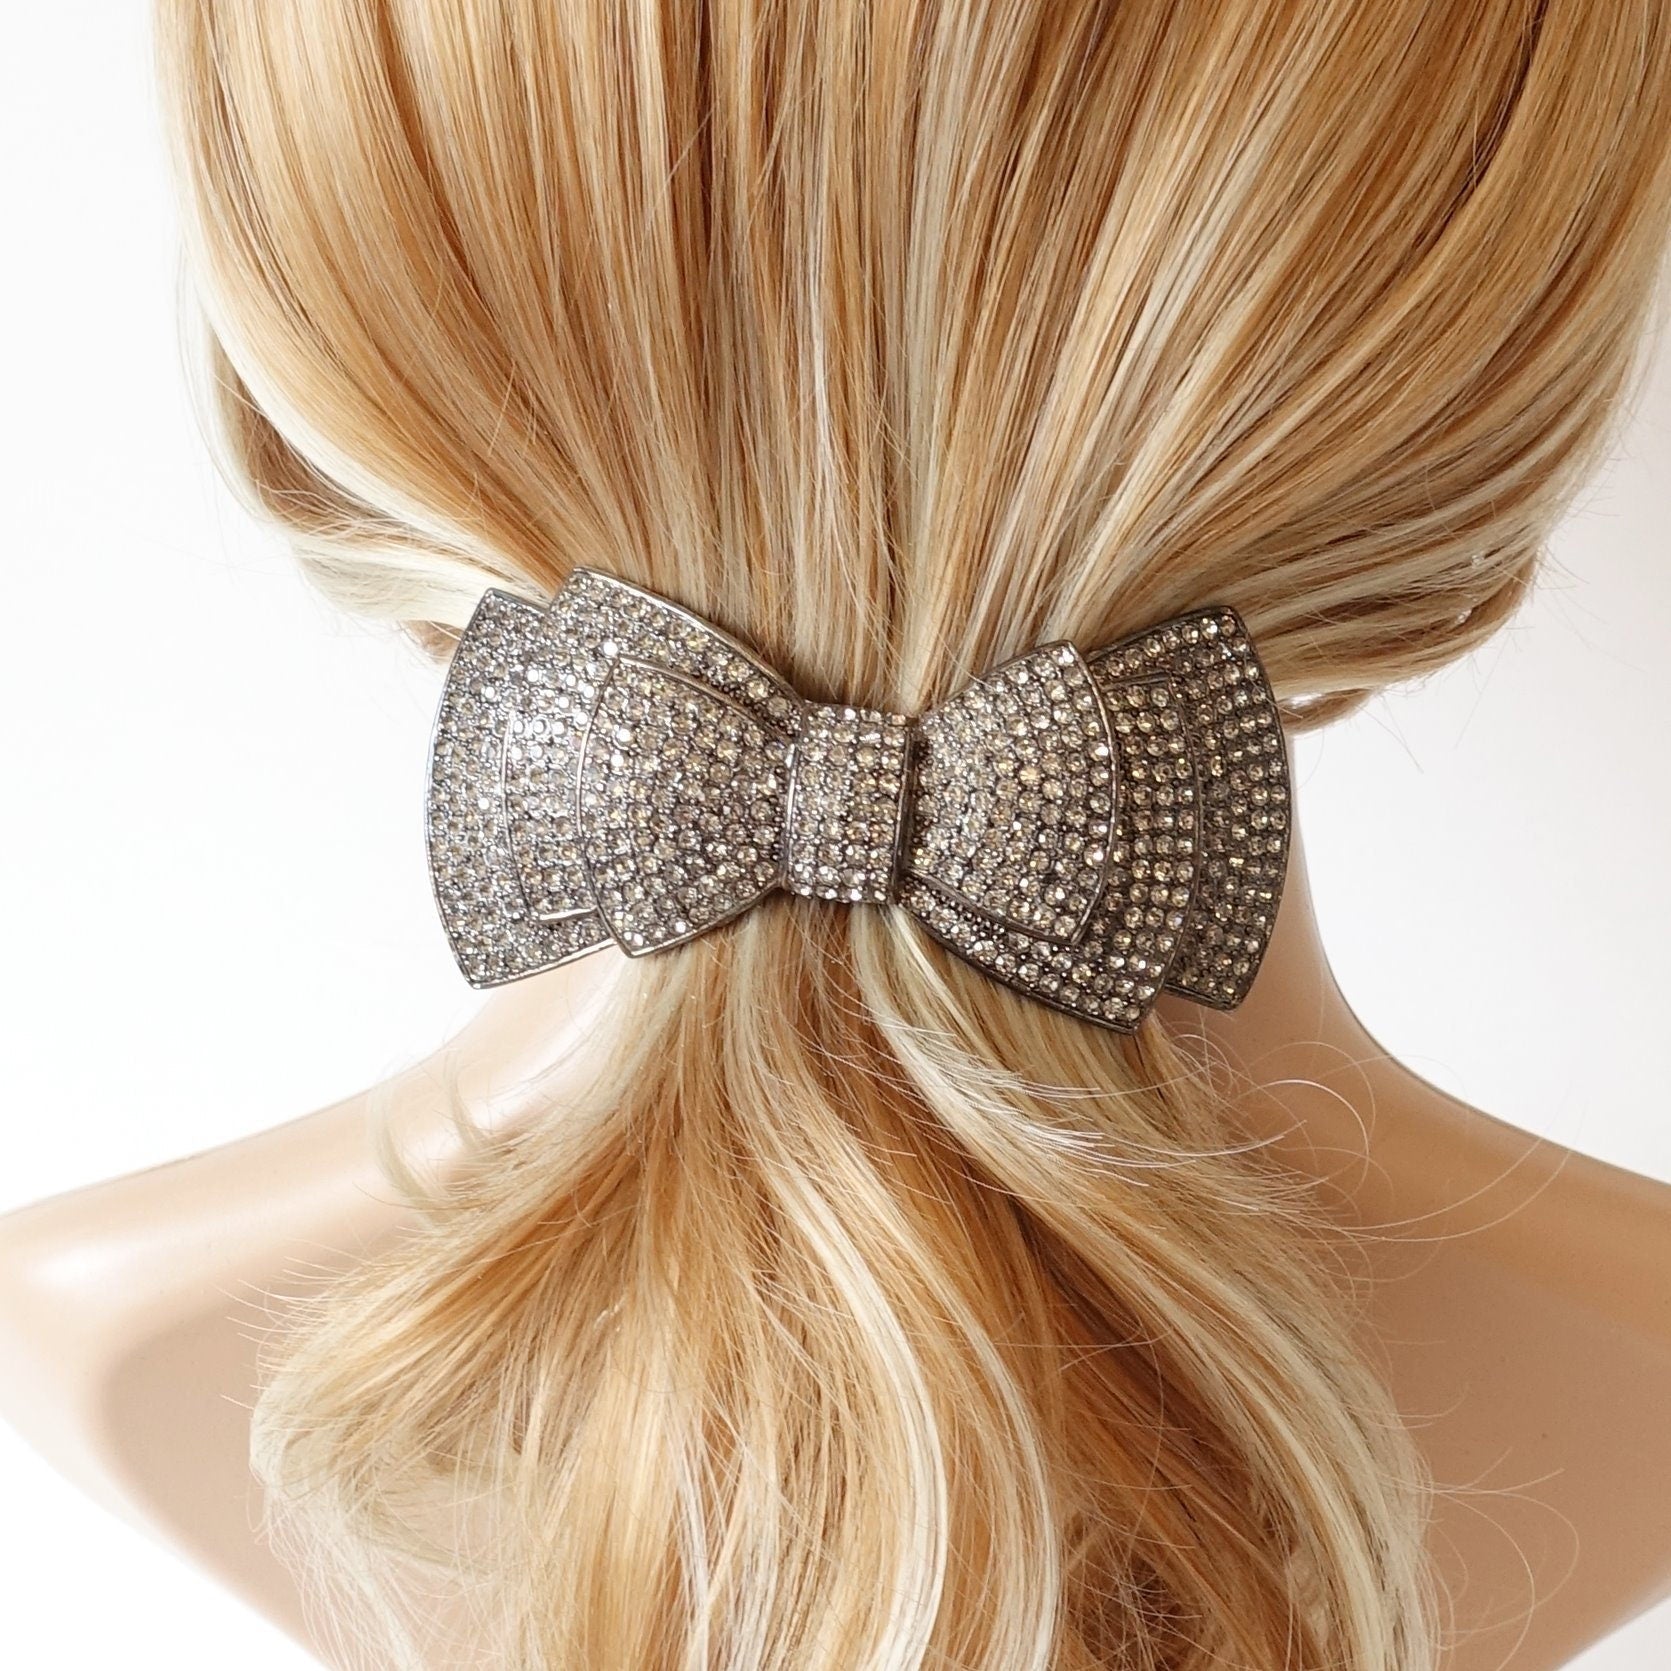 veryshine.com Barrette (Bow) layered hair bow rhinestone decorated french hair barrette crystal jewel decorated women hair accessory